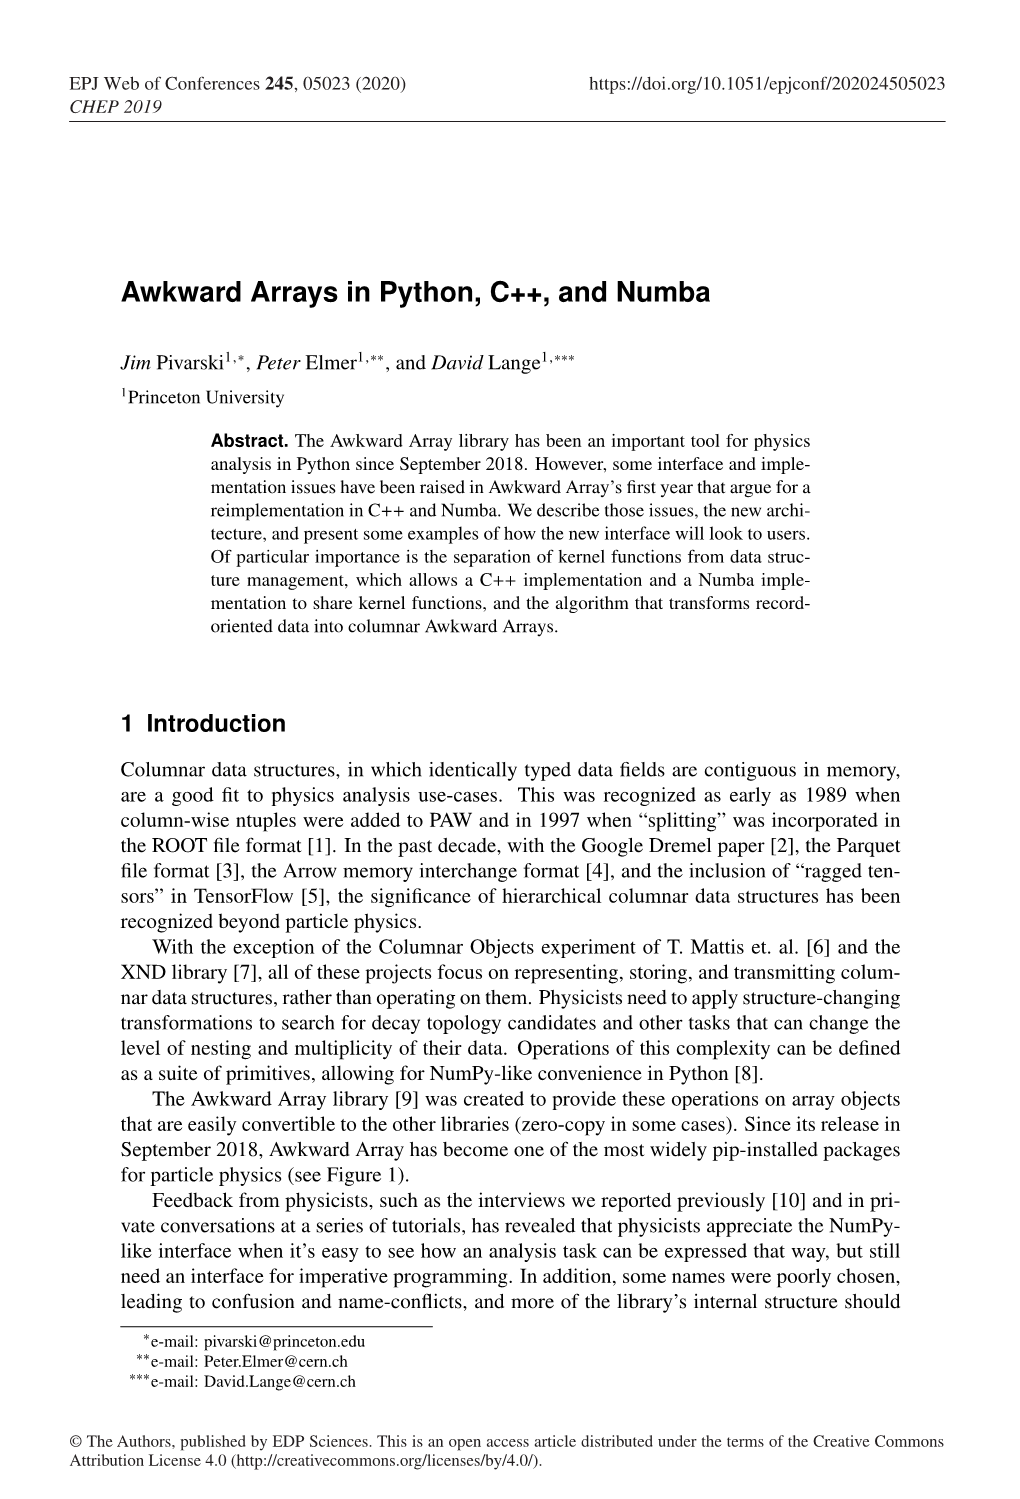 Awkward Arrays in Python, C++, and Numba